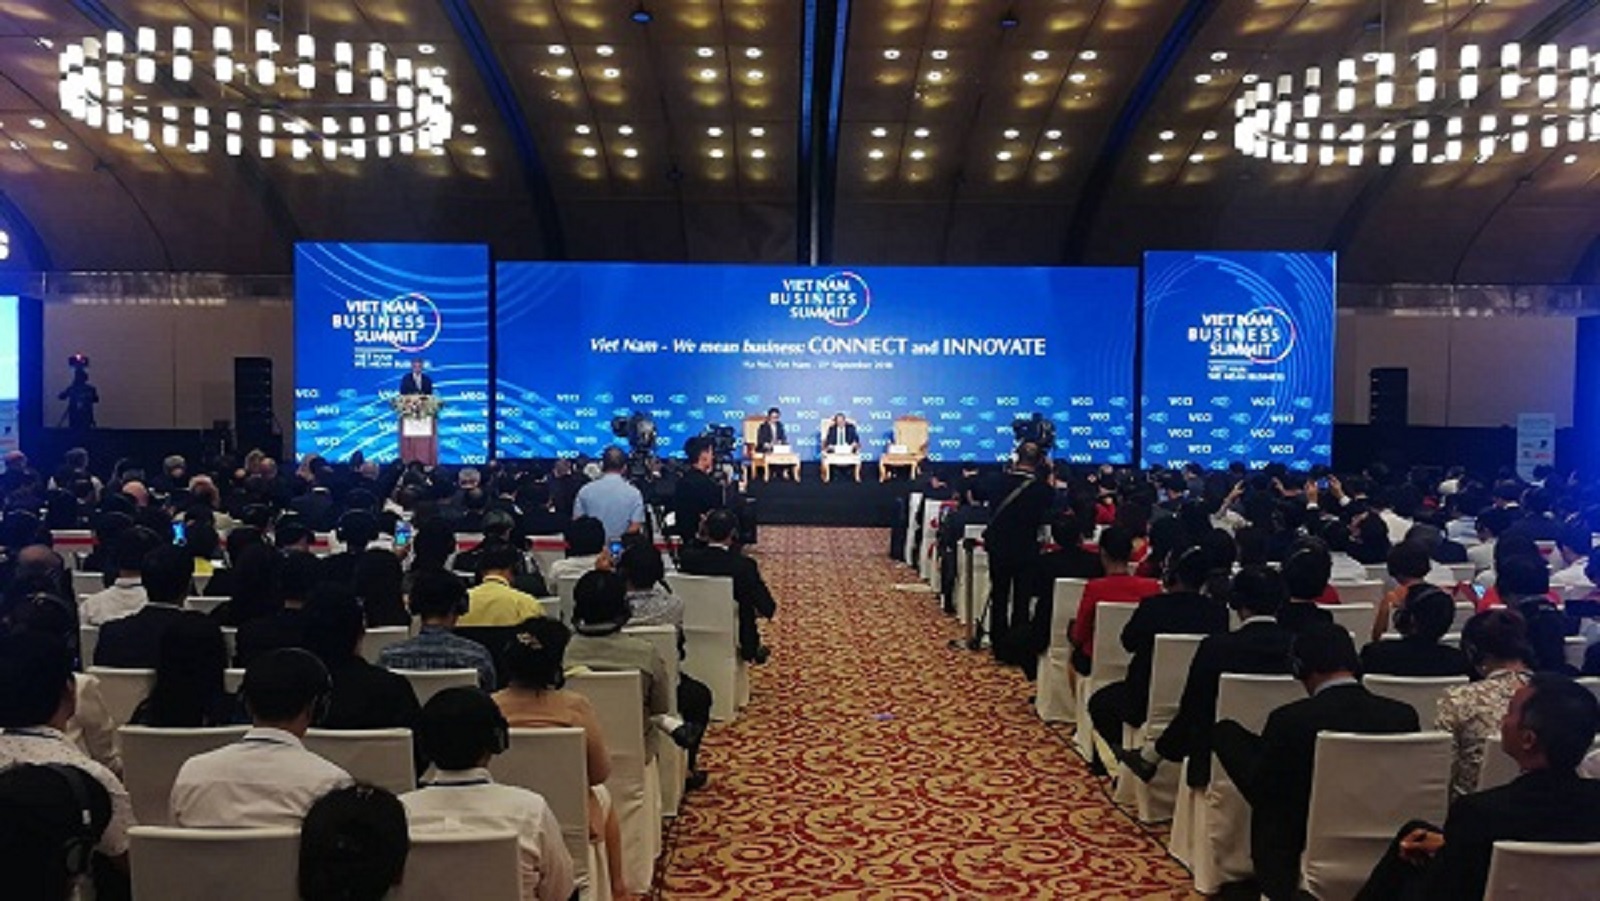 The Vietnam Business Summit receives 1,200 international and domestic businesses (Photo: VNA)